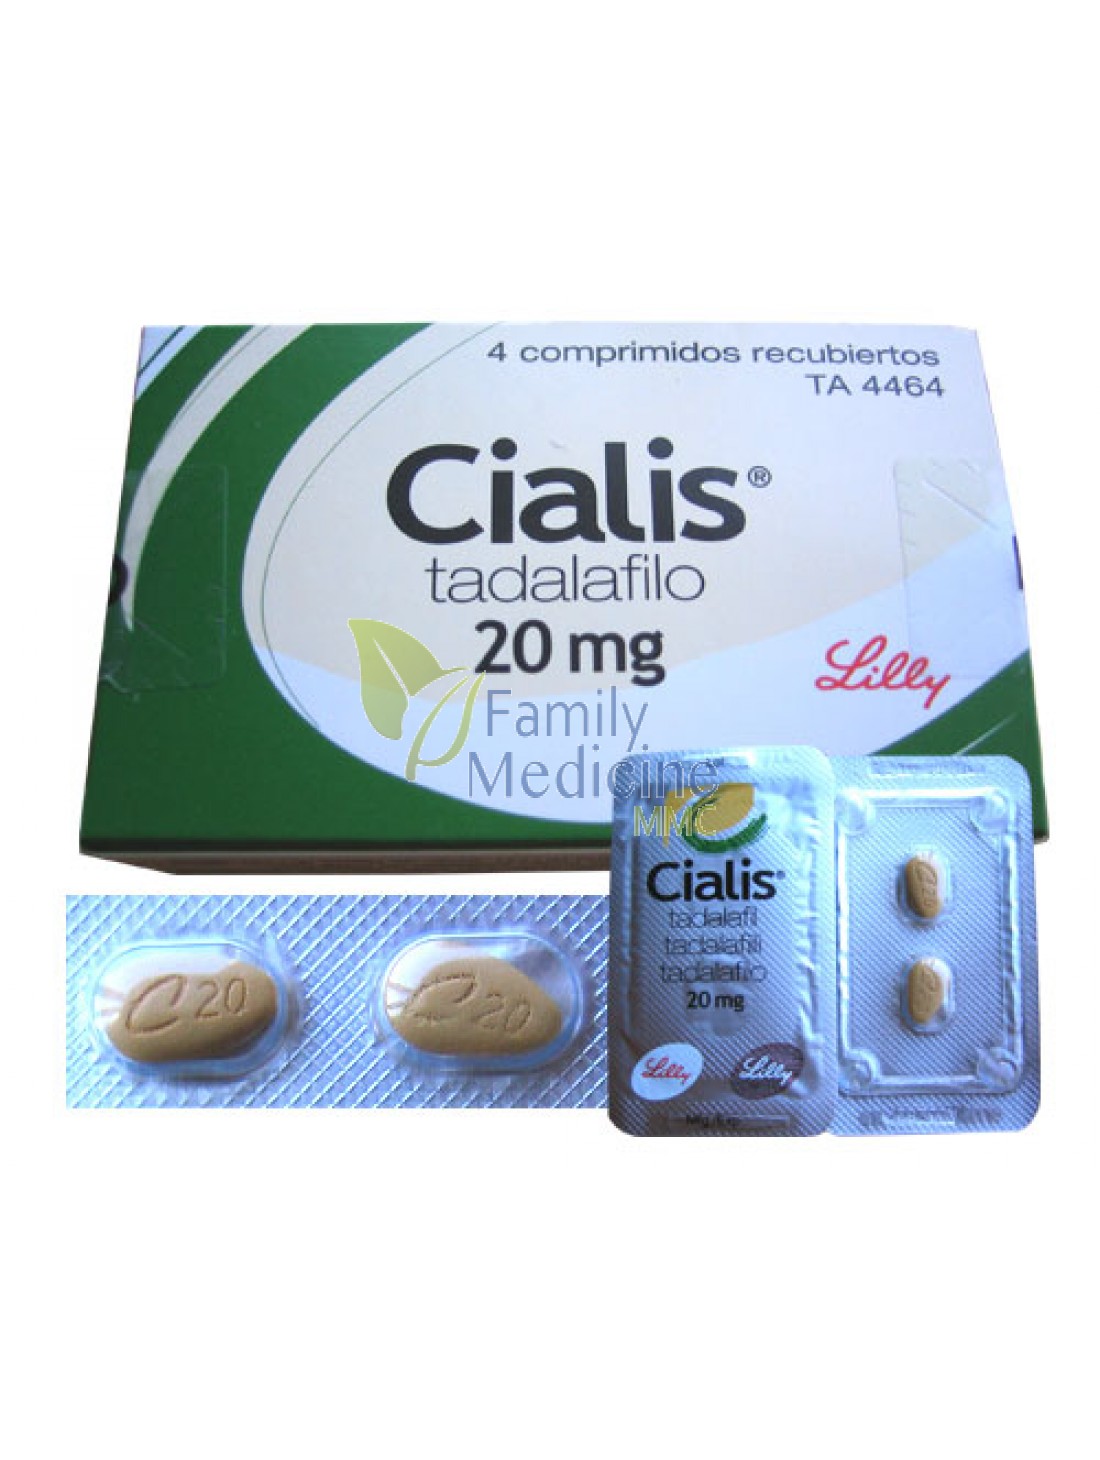 what is dosage of cialis